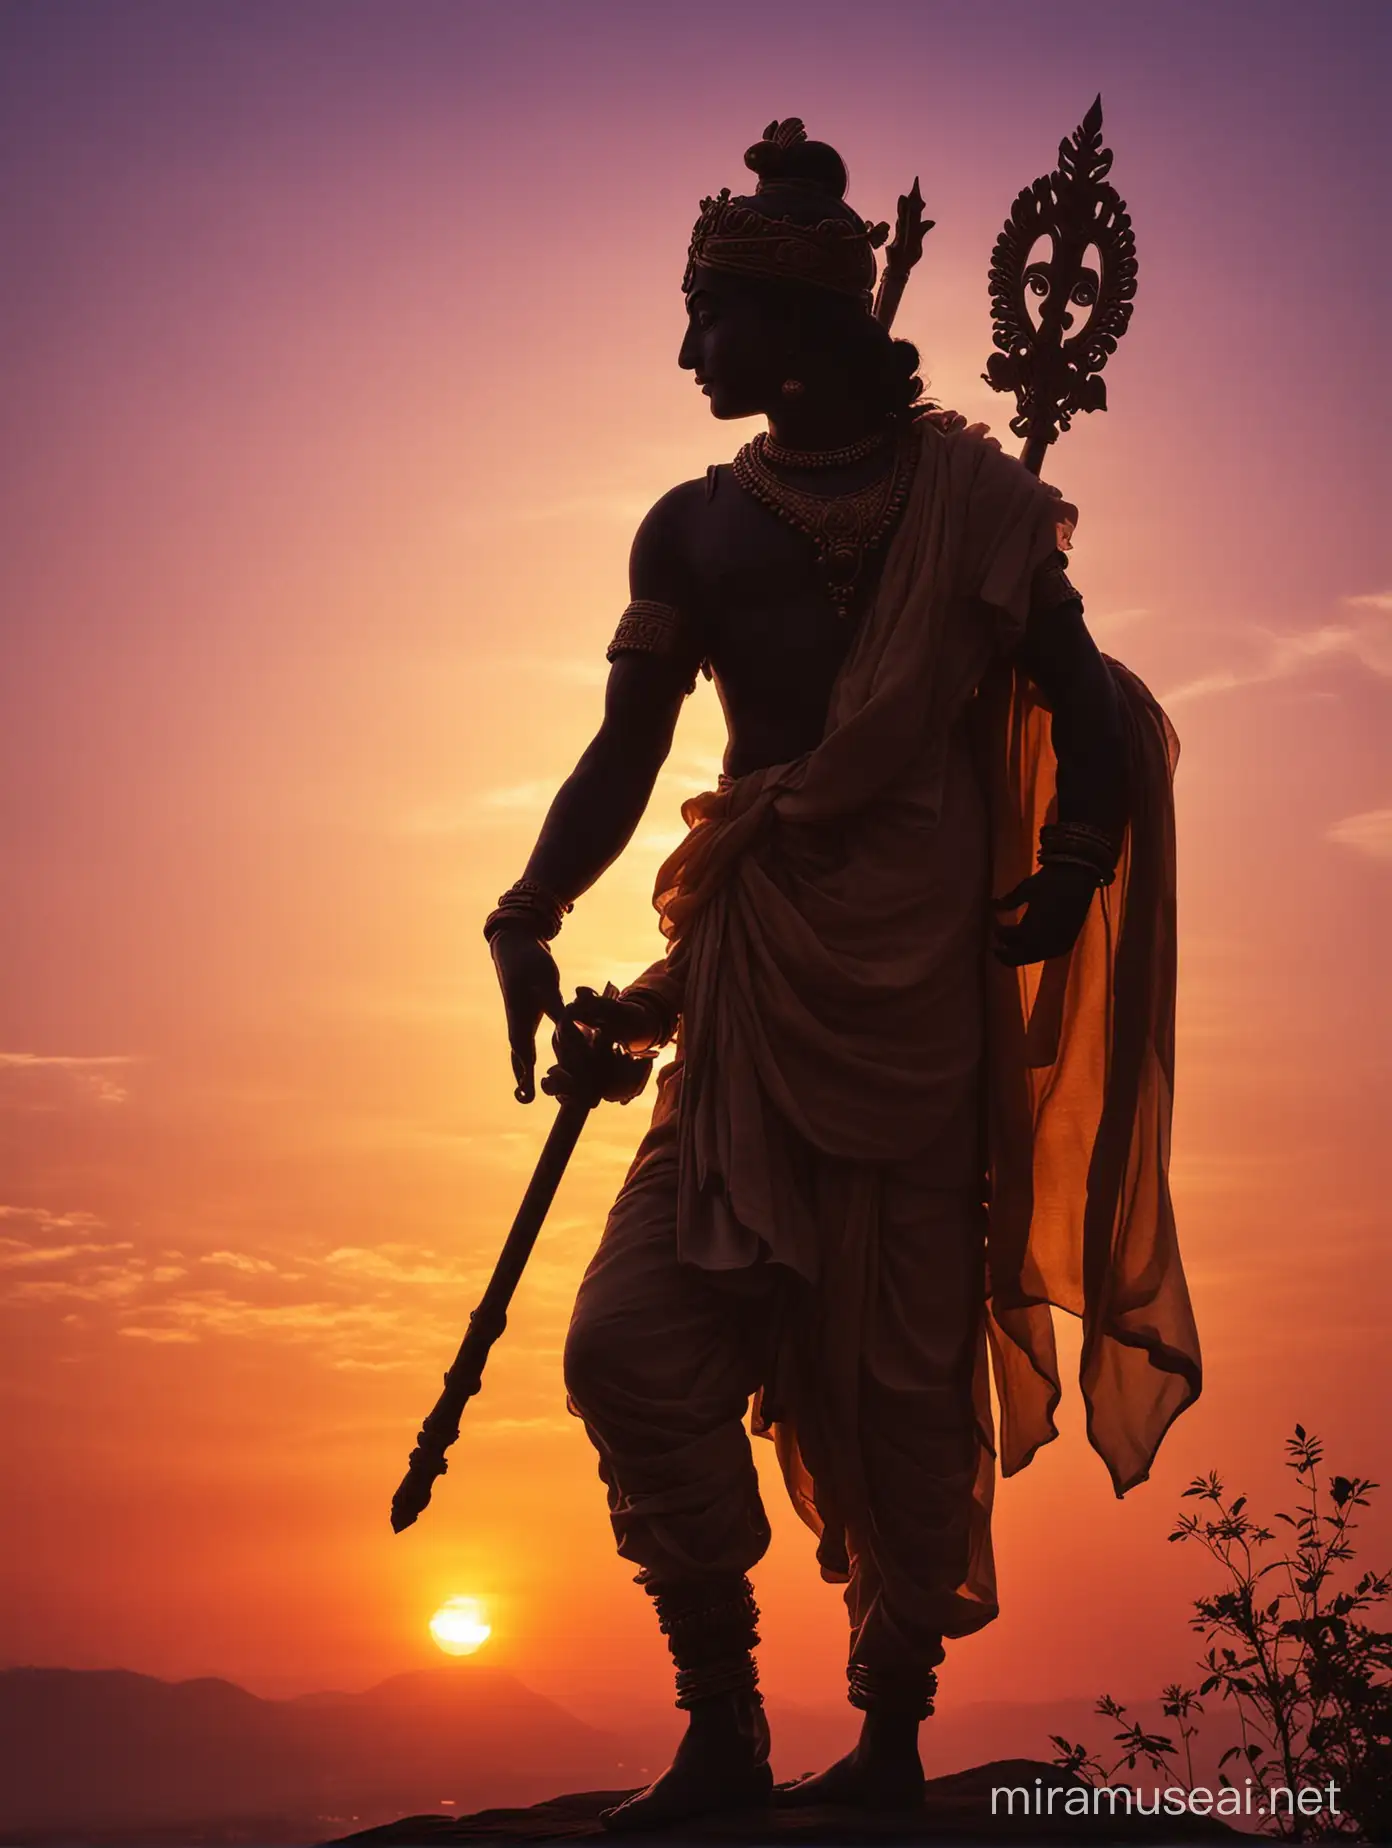  silhouette of Lord Krishna against a colorful background or sunset could create a visually striking image, symbolizing his divine presence and wisdom.